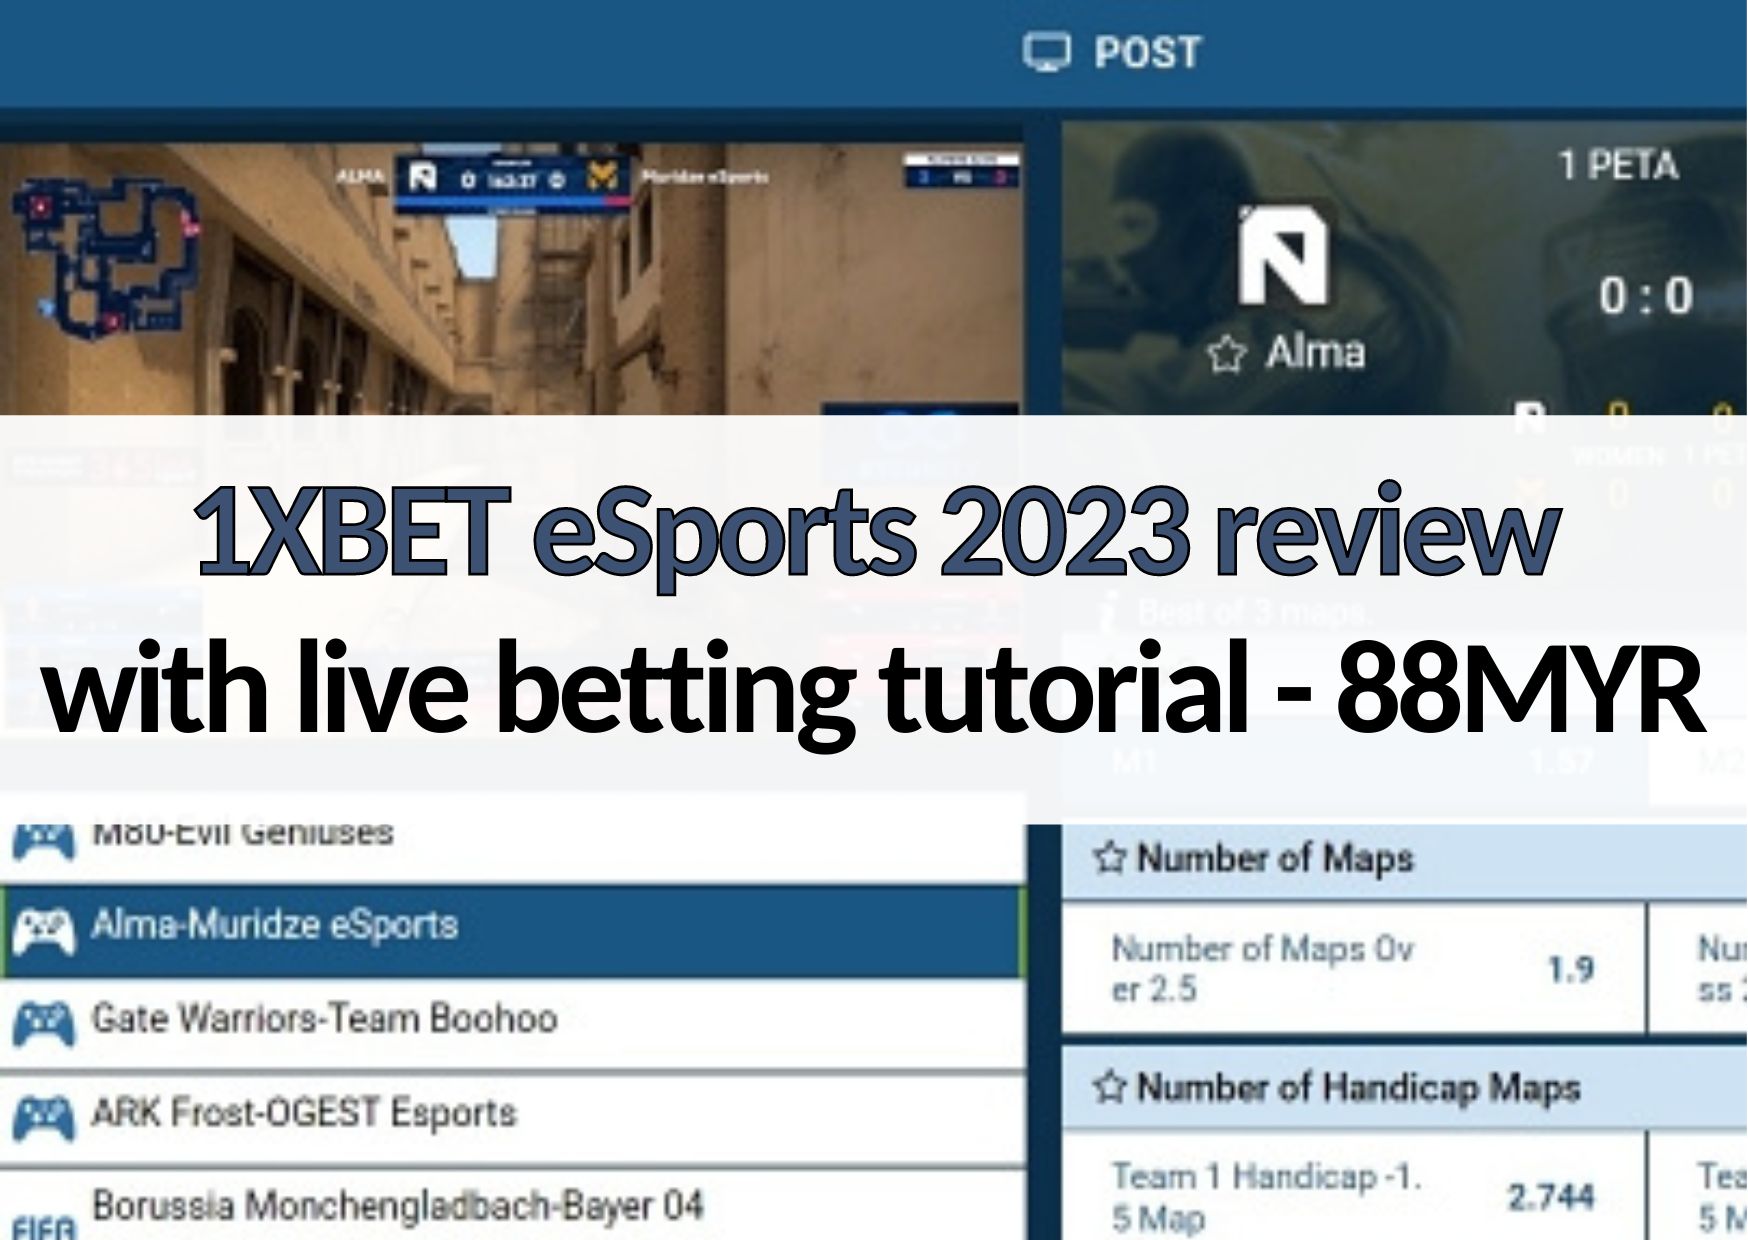 88myr 1xbet esports 2023 review live betting tutorial